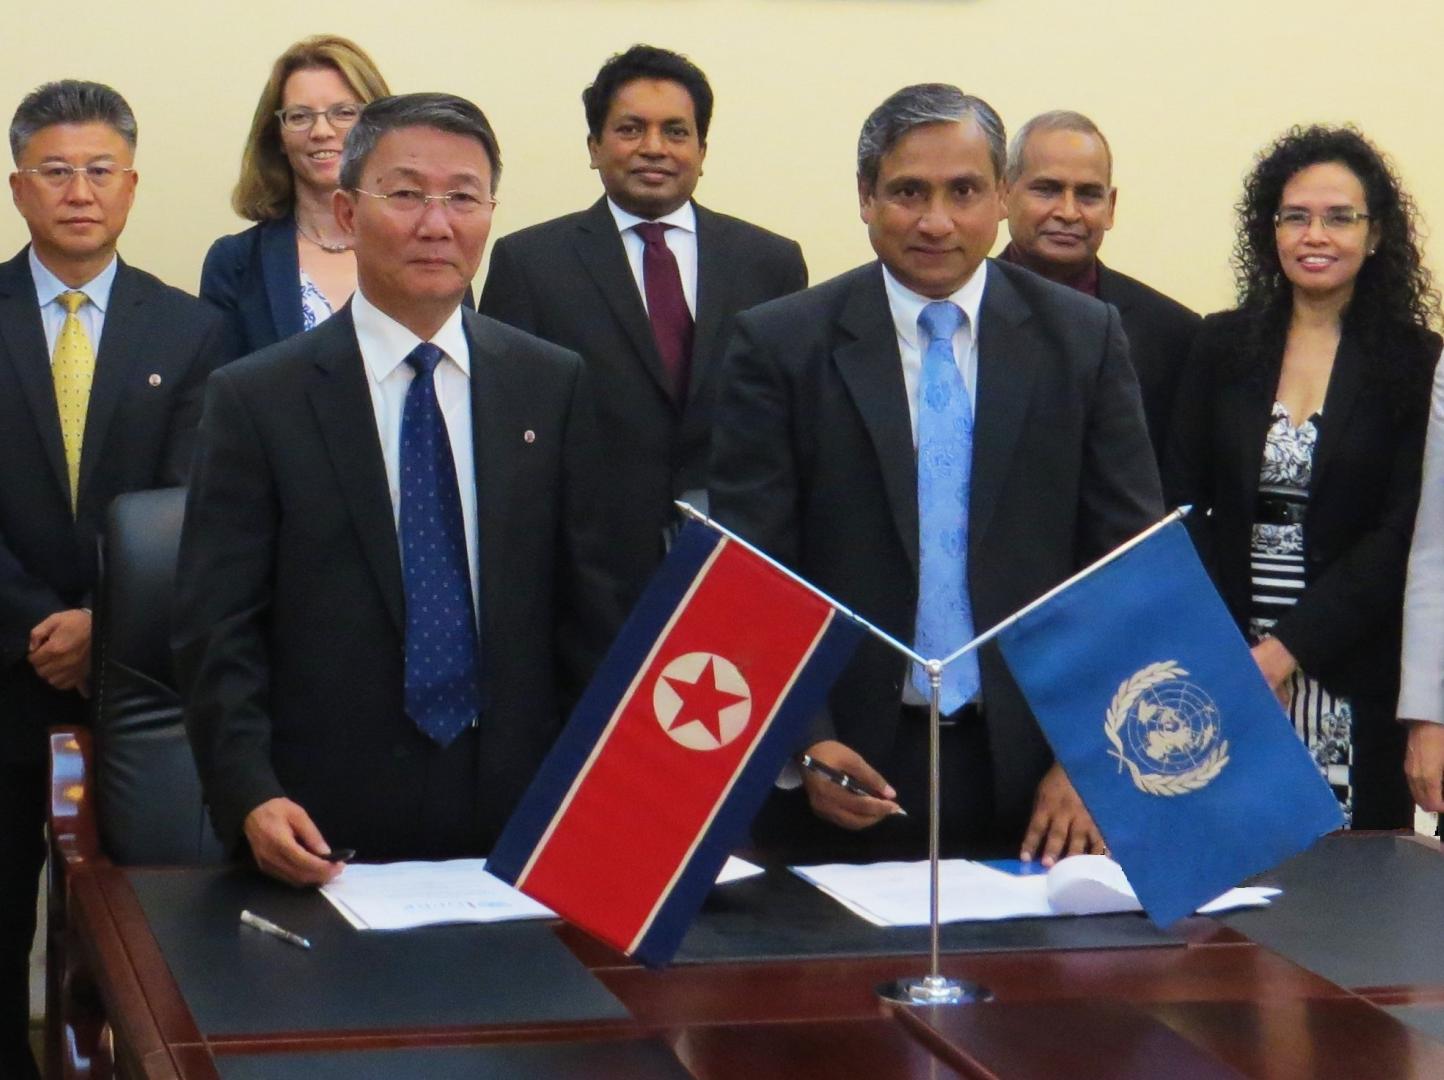 Signature ceremony of The United Nations Strategic Framework for DPRK on 1 September 2016. (left) Mr Kim Chang Min, Secretary-General, National Coordinating Committee, Ministry of Foreign Affairs of DPRK; (right) Mr Tapan Mishra, UN Resident Coordinator for DPRK